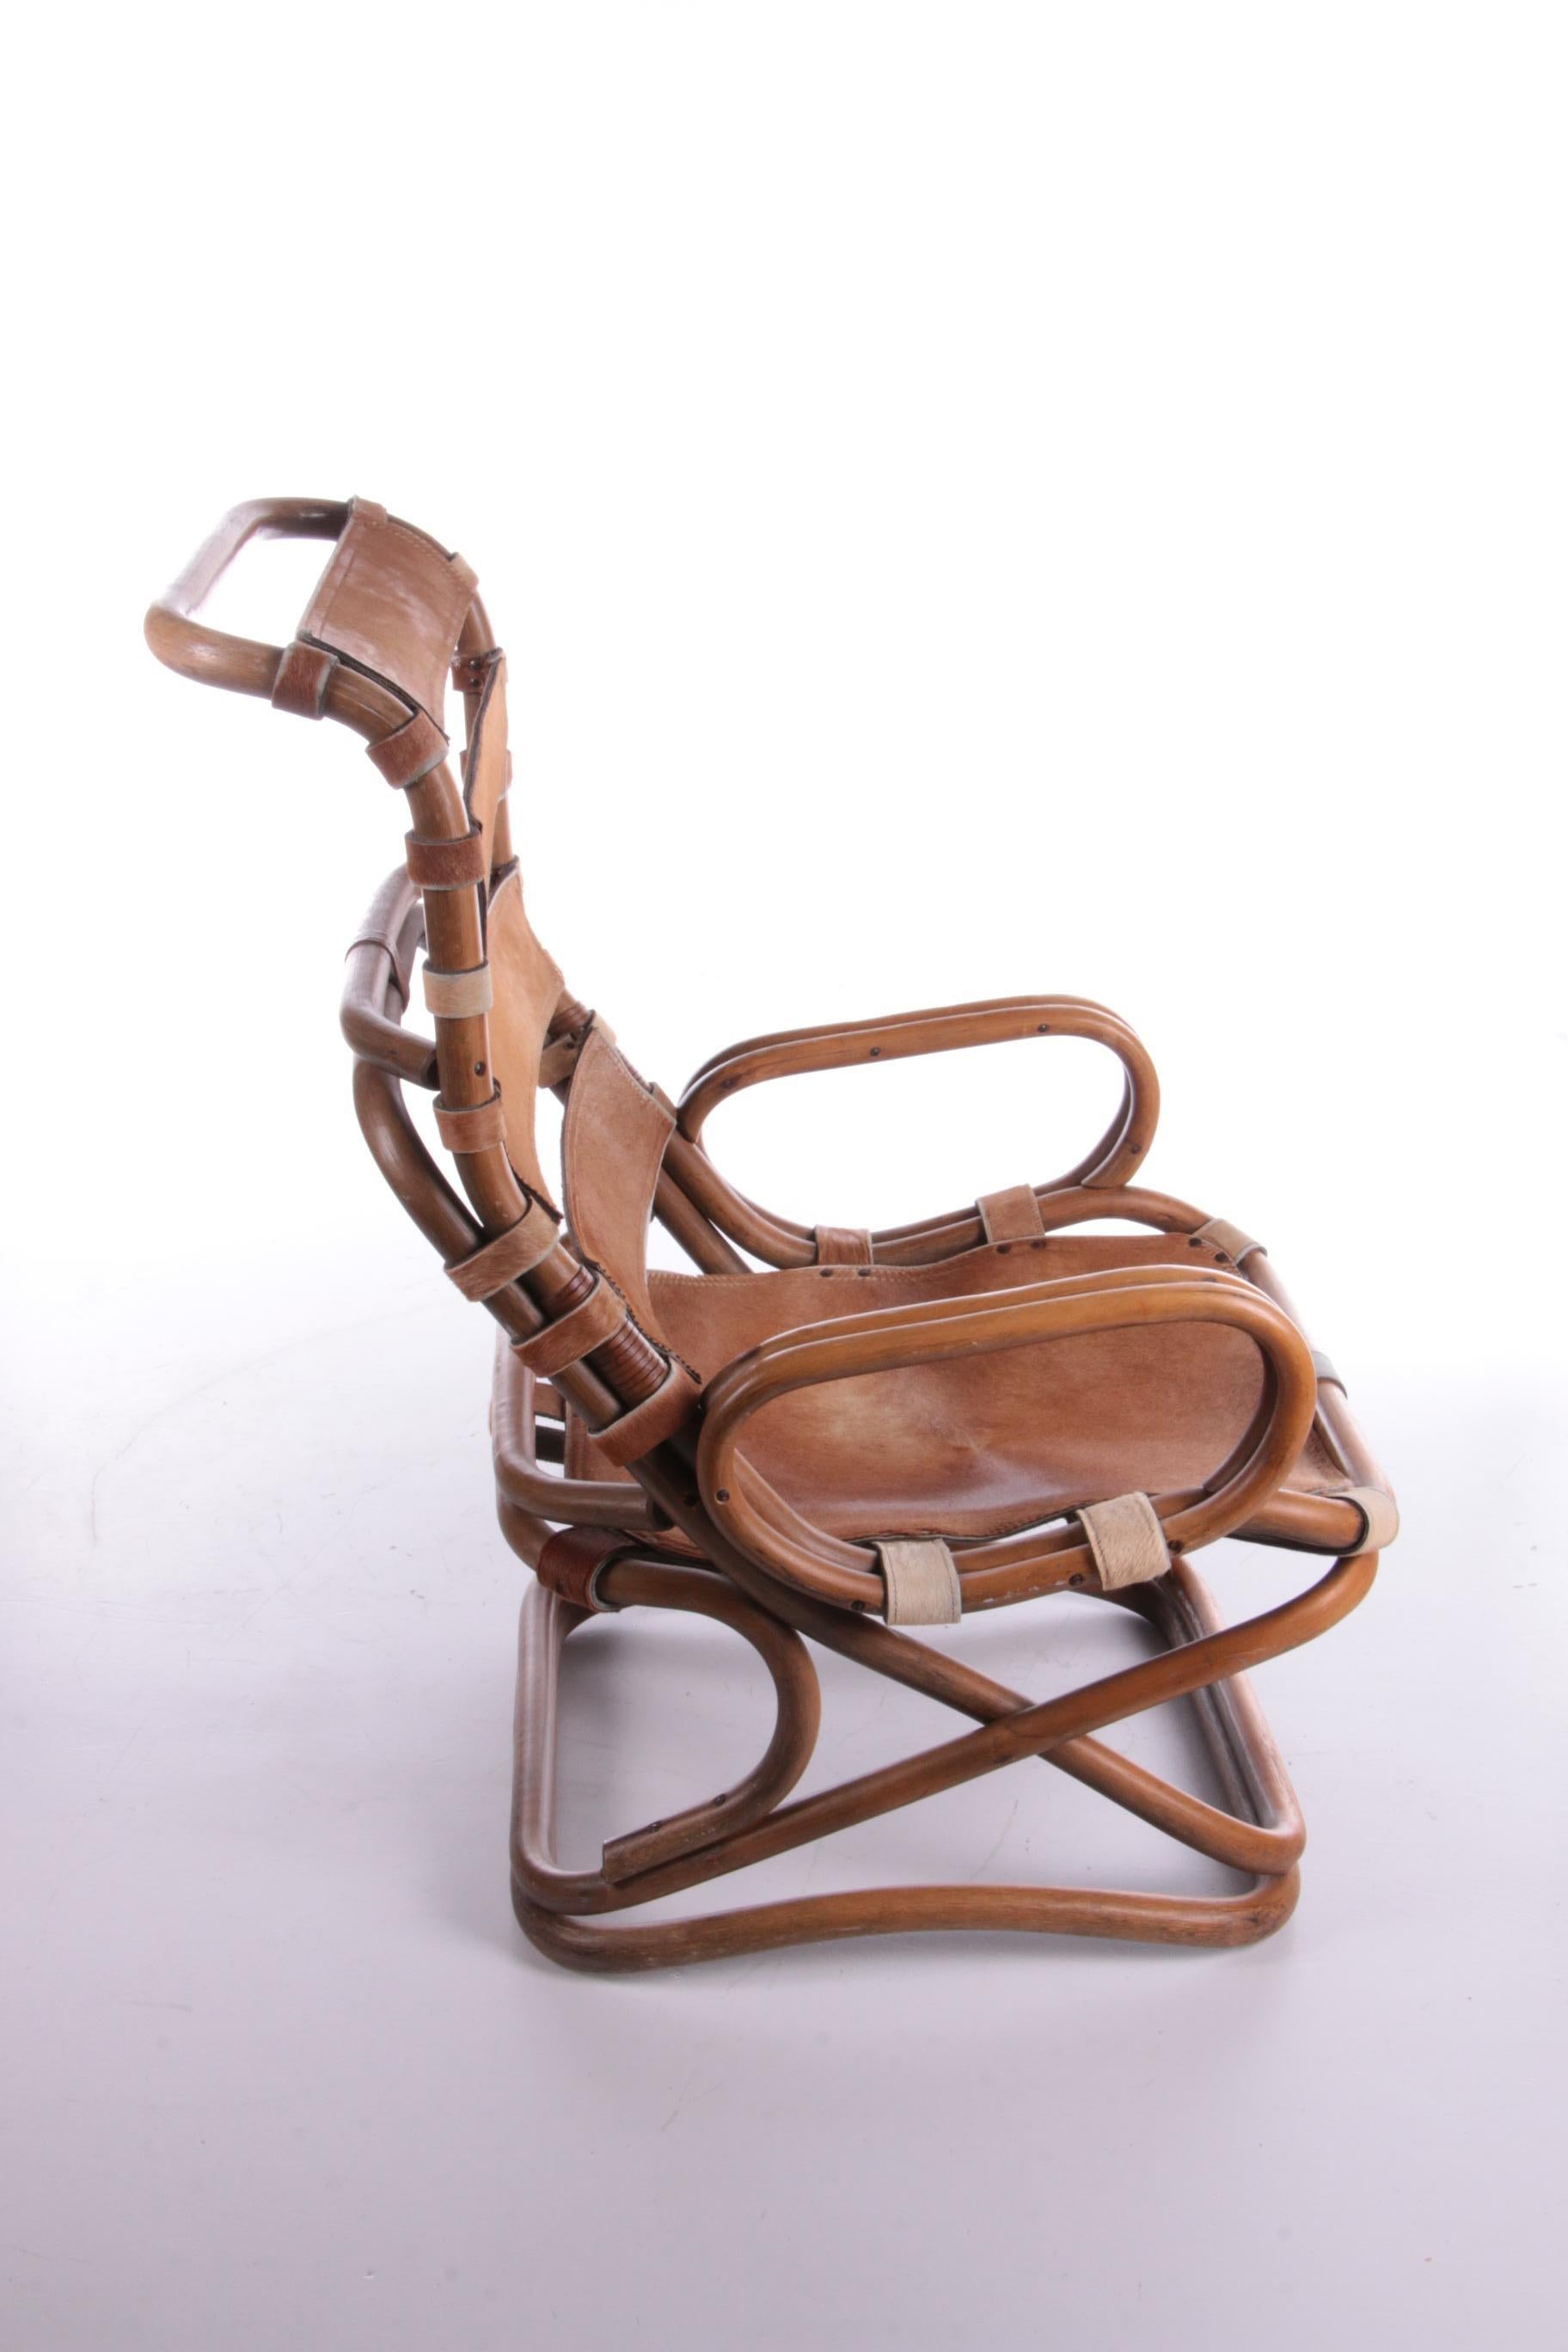 Italian Tito Agnoli Relax Chair Made of Bamboo and Leather, 1960 For Sale